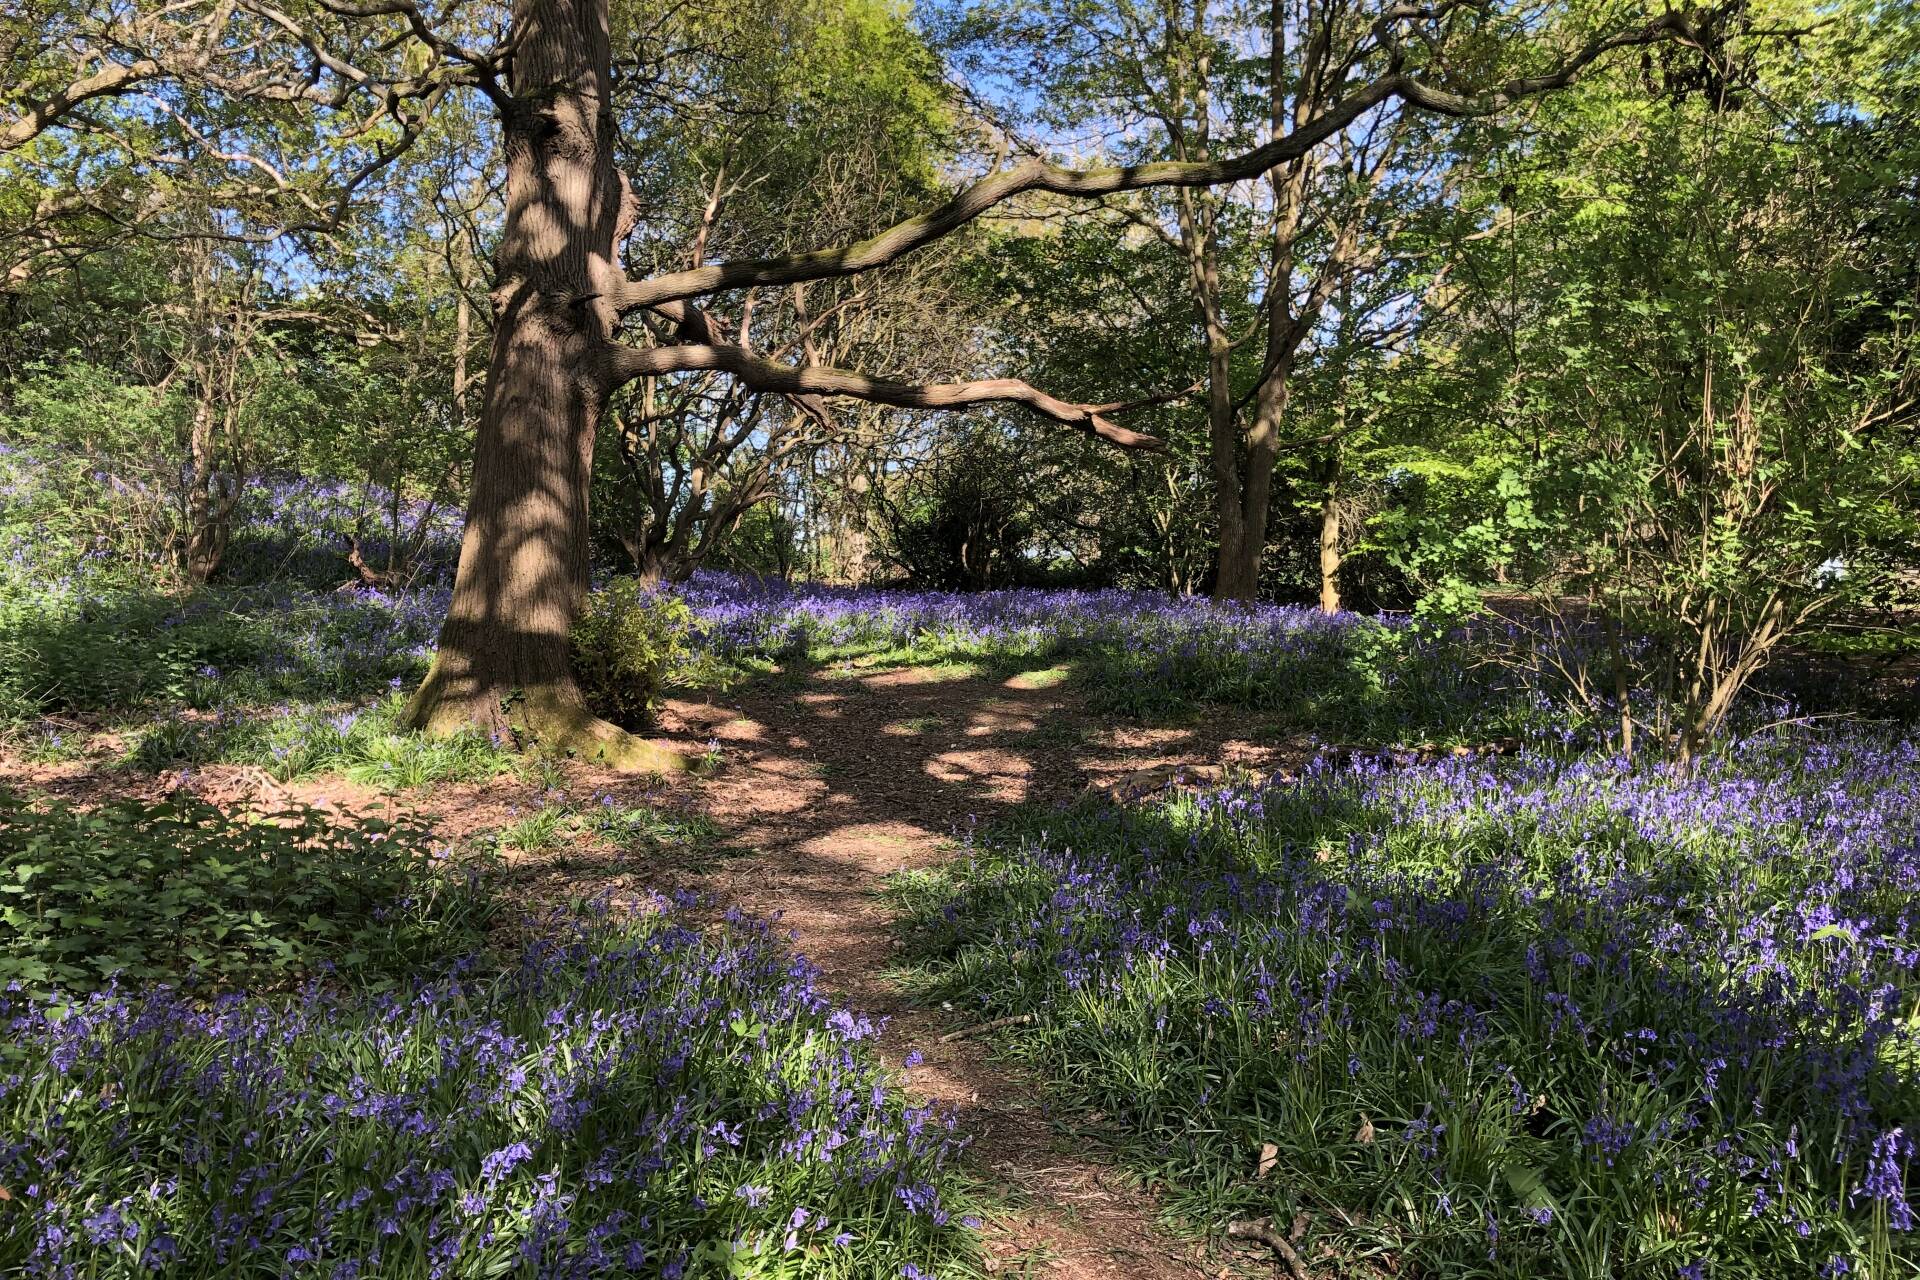 Bluebell woods and a dirt path with trees surrounding